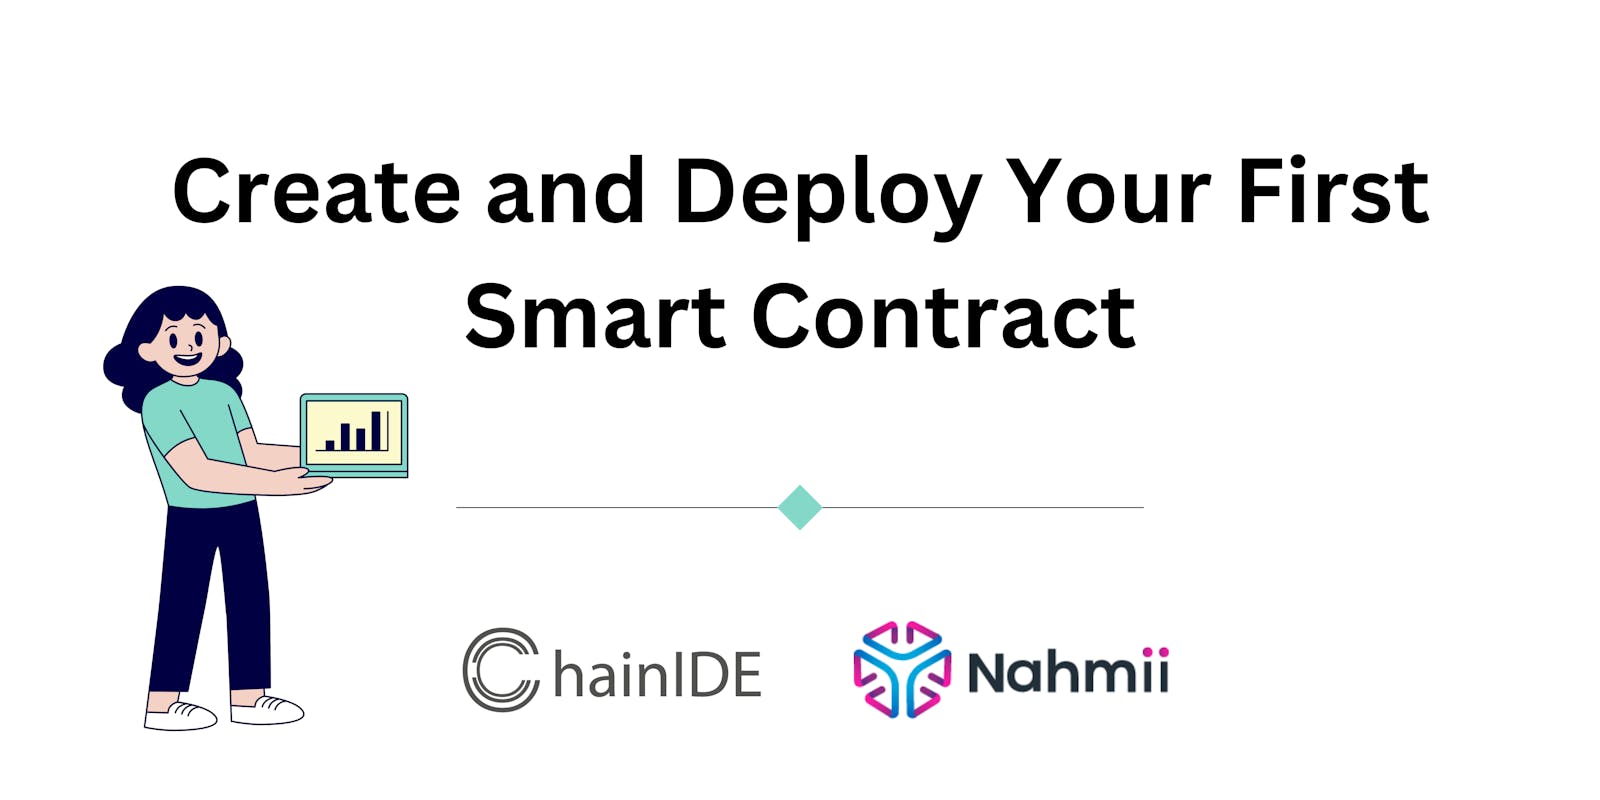 Create and Deploy Your First Smart Contract with Nahmii ChainIDE, Solidity, and MetaMask